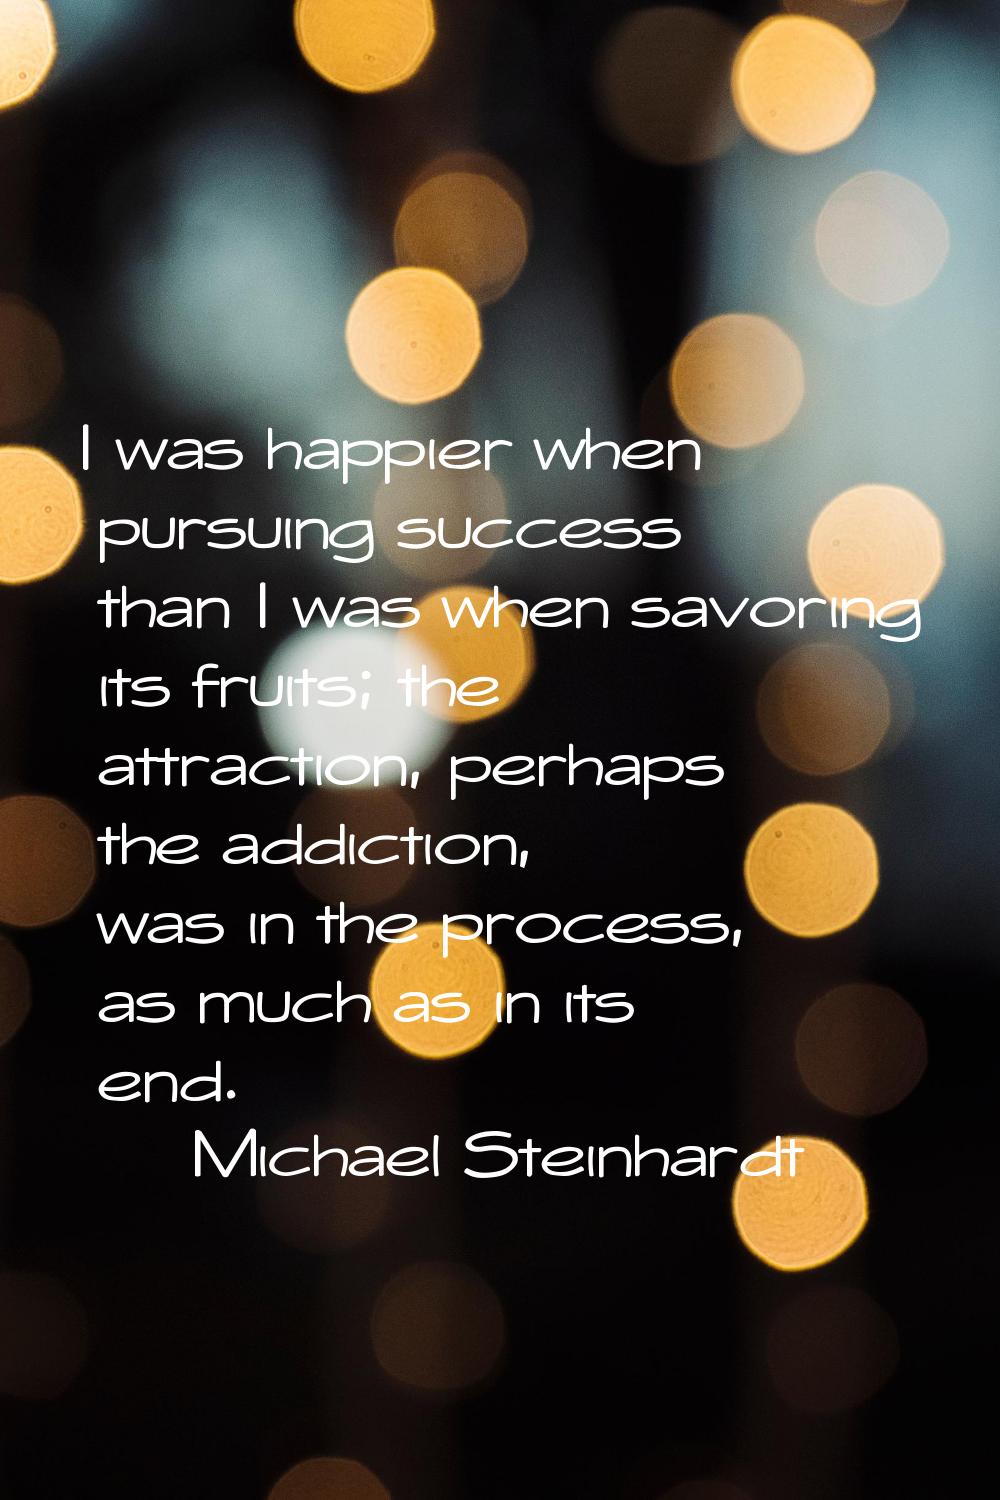 I was happier when pursuing success than I was when savoring its fruits; the attraction, perhaps th